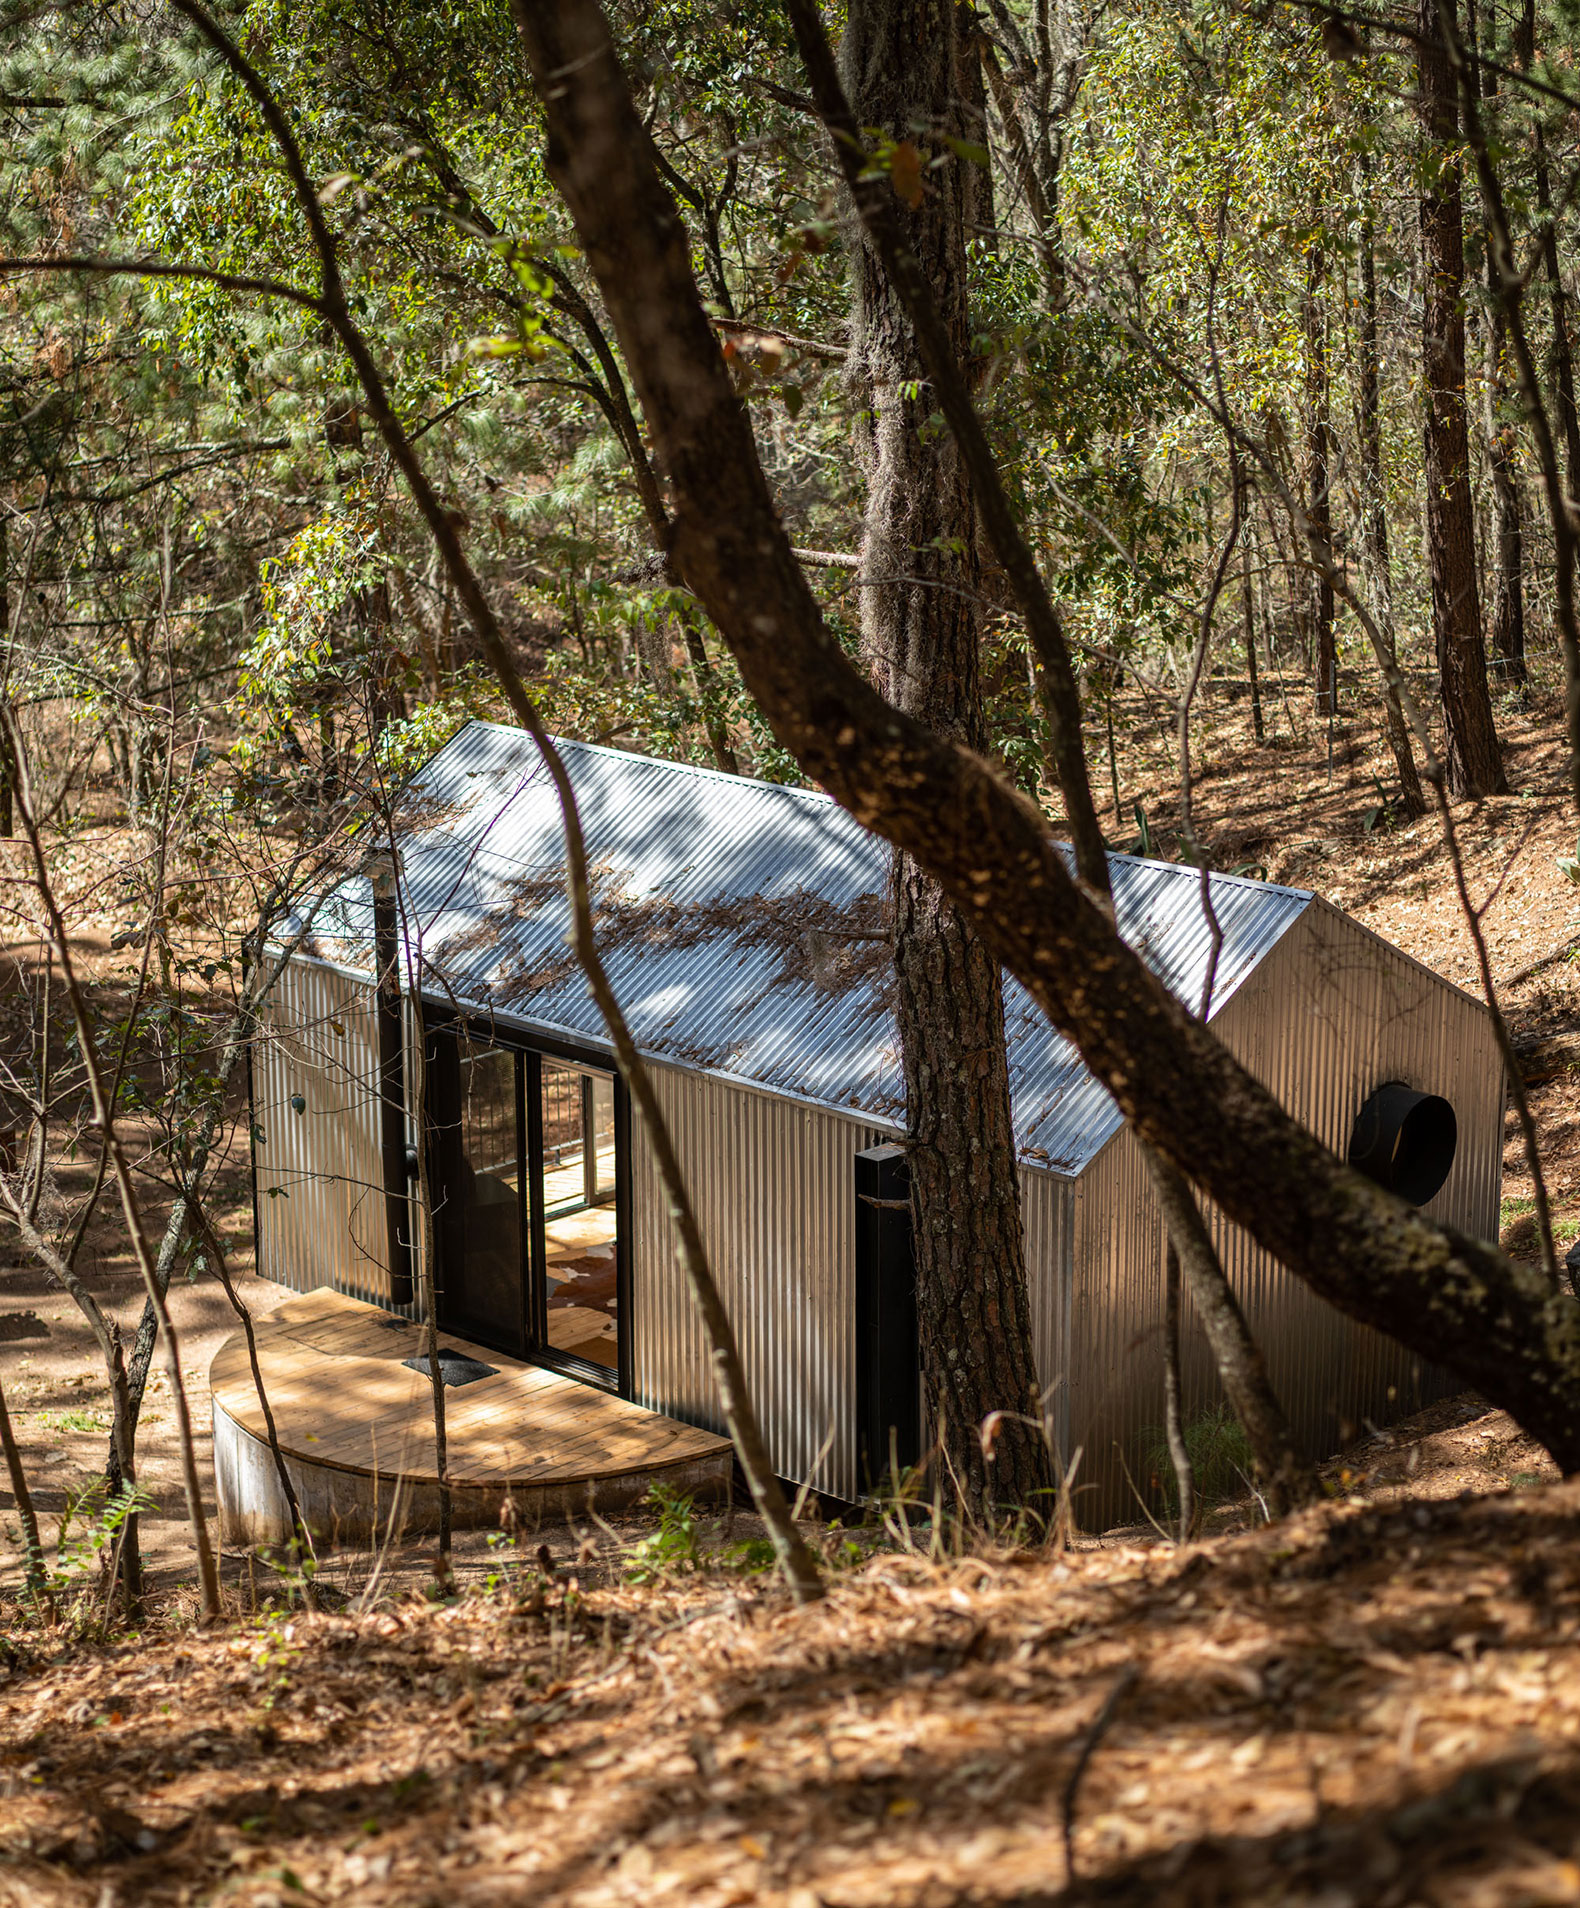 Looking for the best in nature. Concentric Glamping x The Outlands by S-AR, The Strength of Architecture